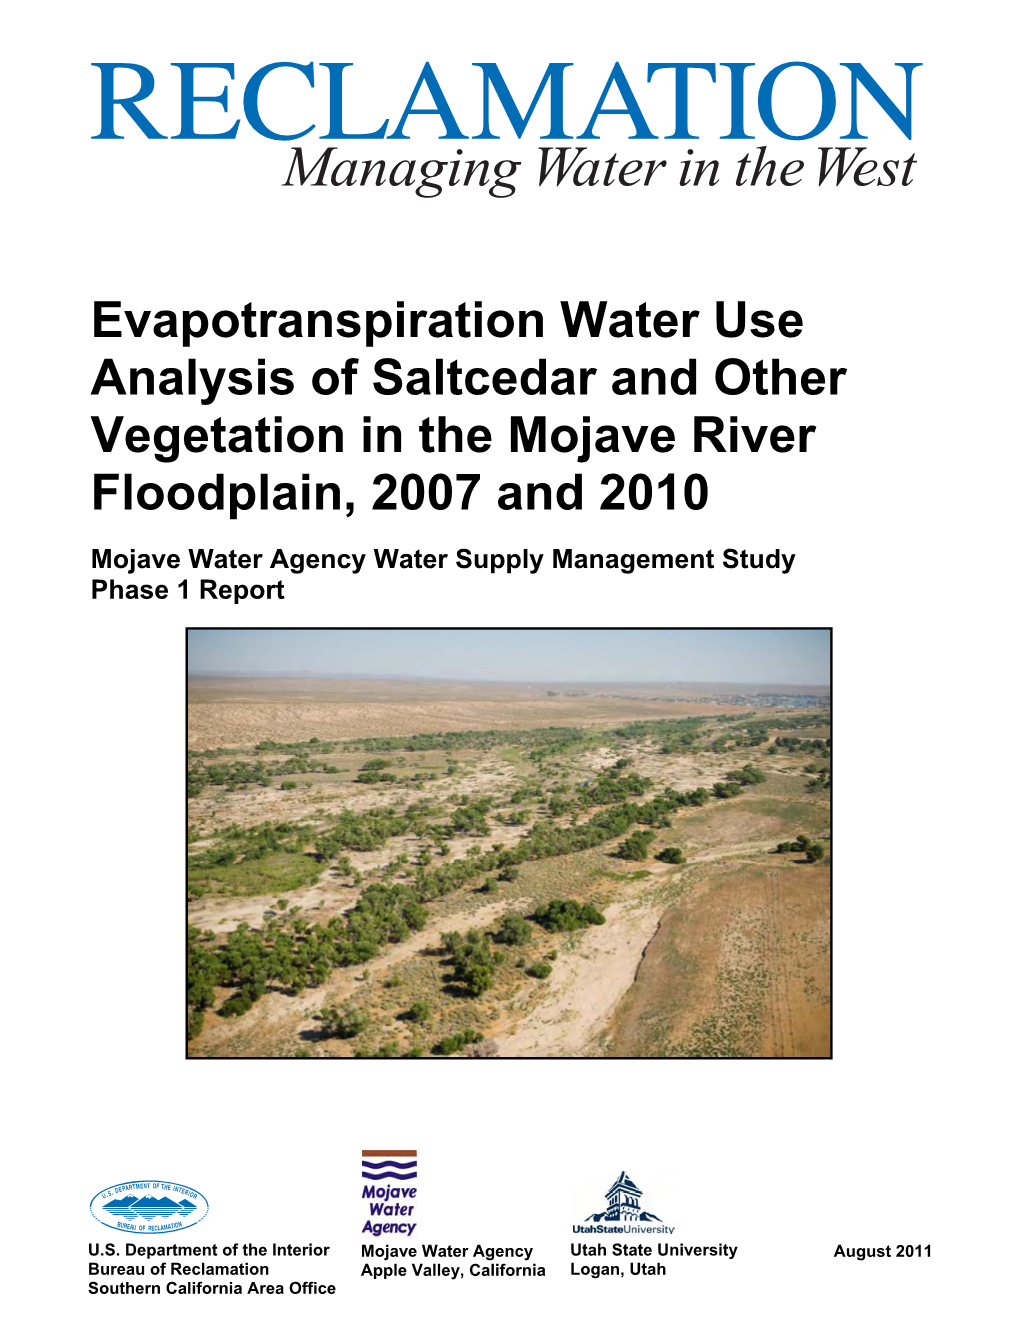 Evapotranspiration Water Use Analysis of Saltcedar and Other Vegetation in the Mojave River Floodplain, 2007 and 2010